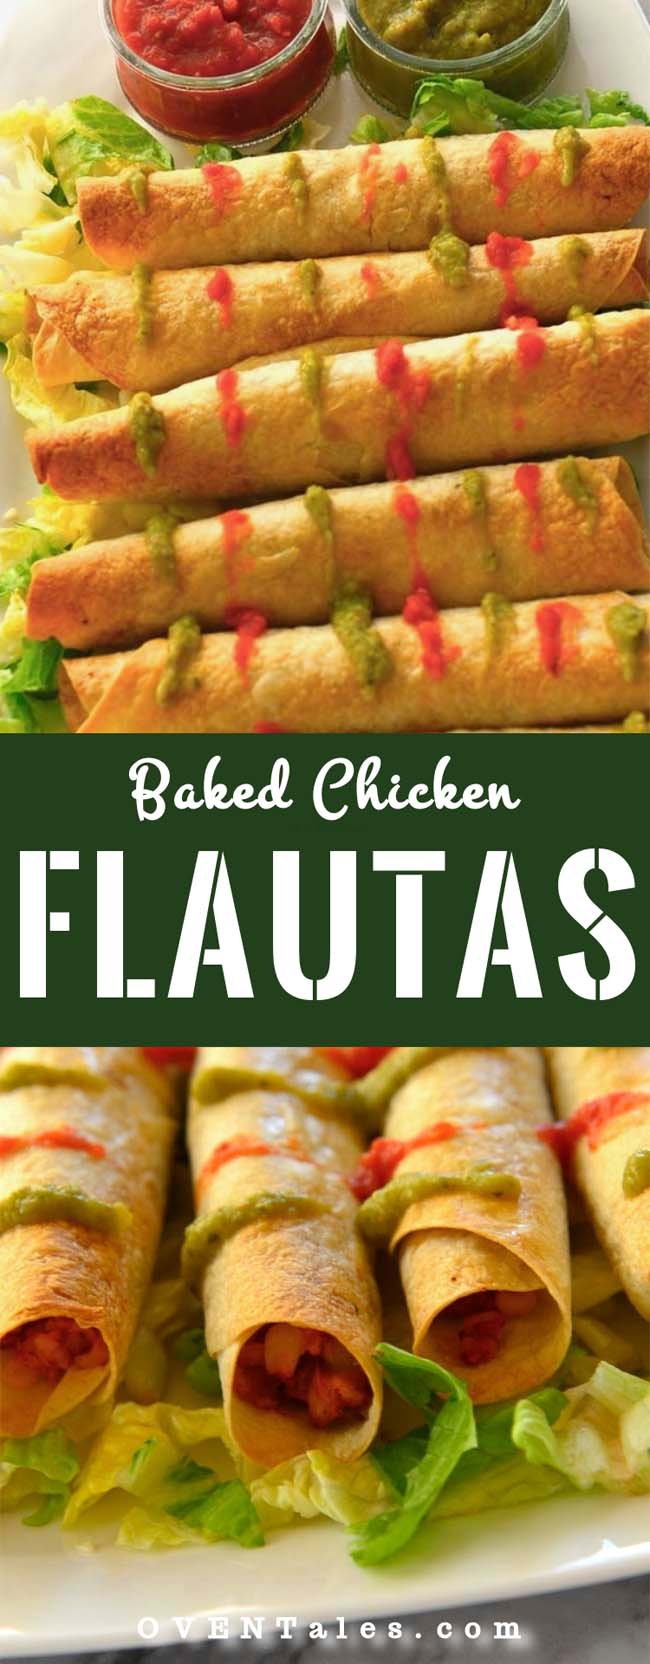 Deliciously crunchy and light chicken Flautas / taquitos